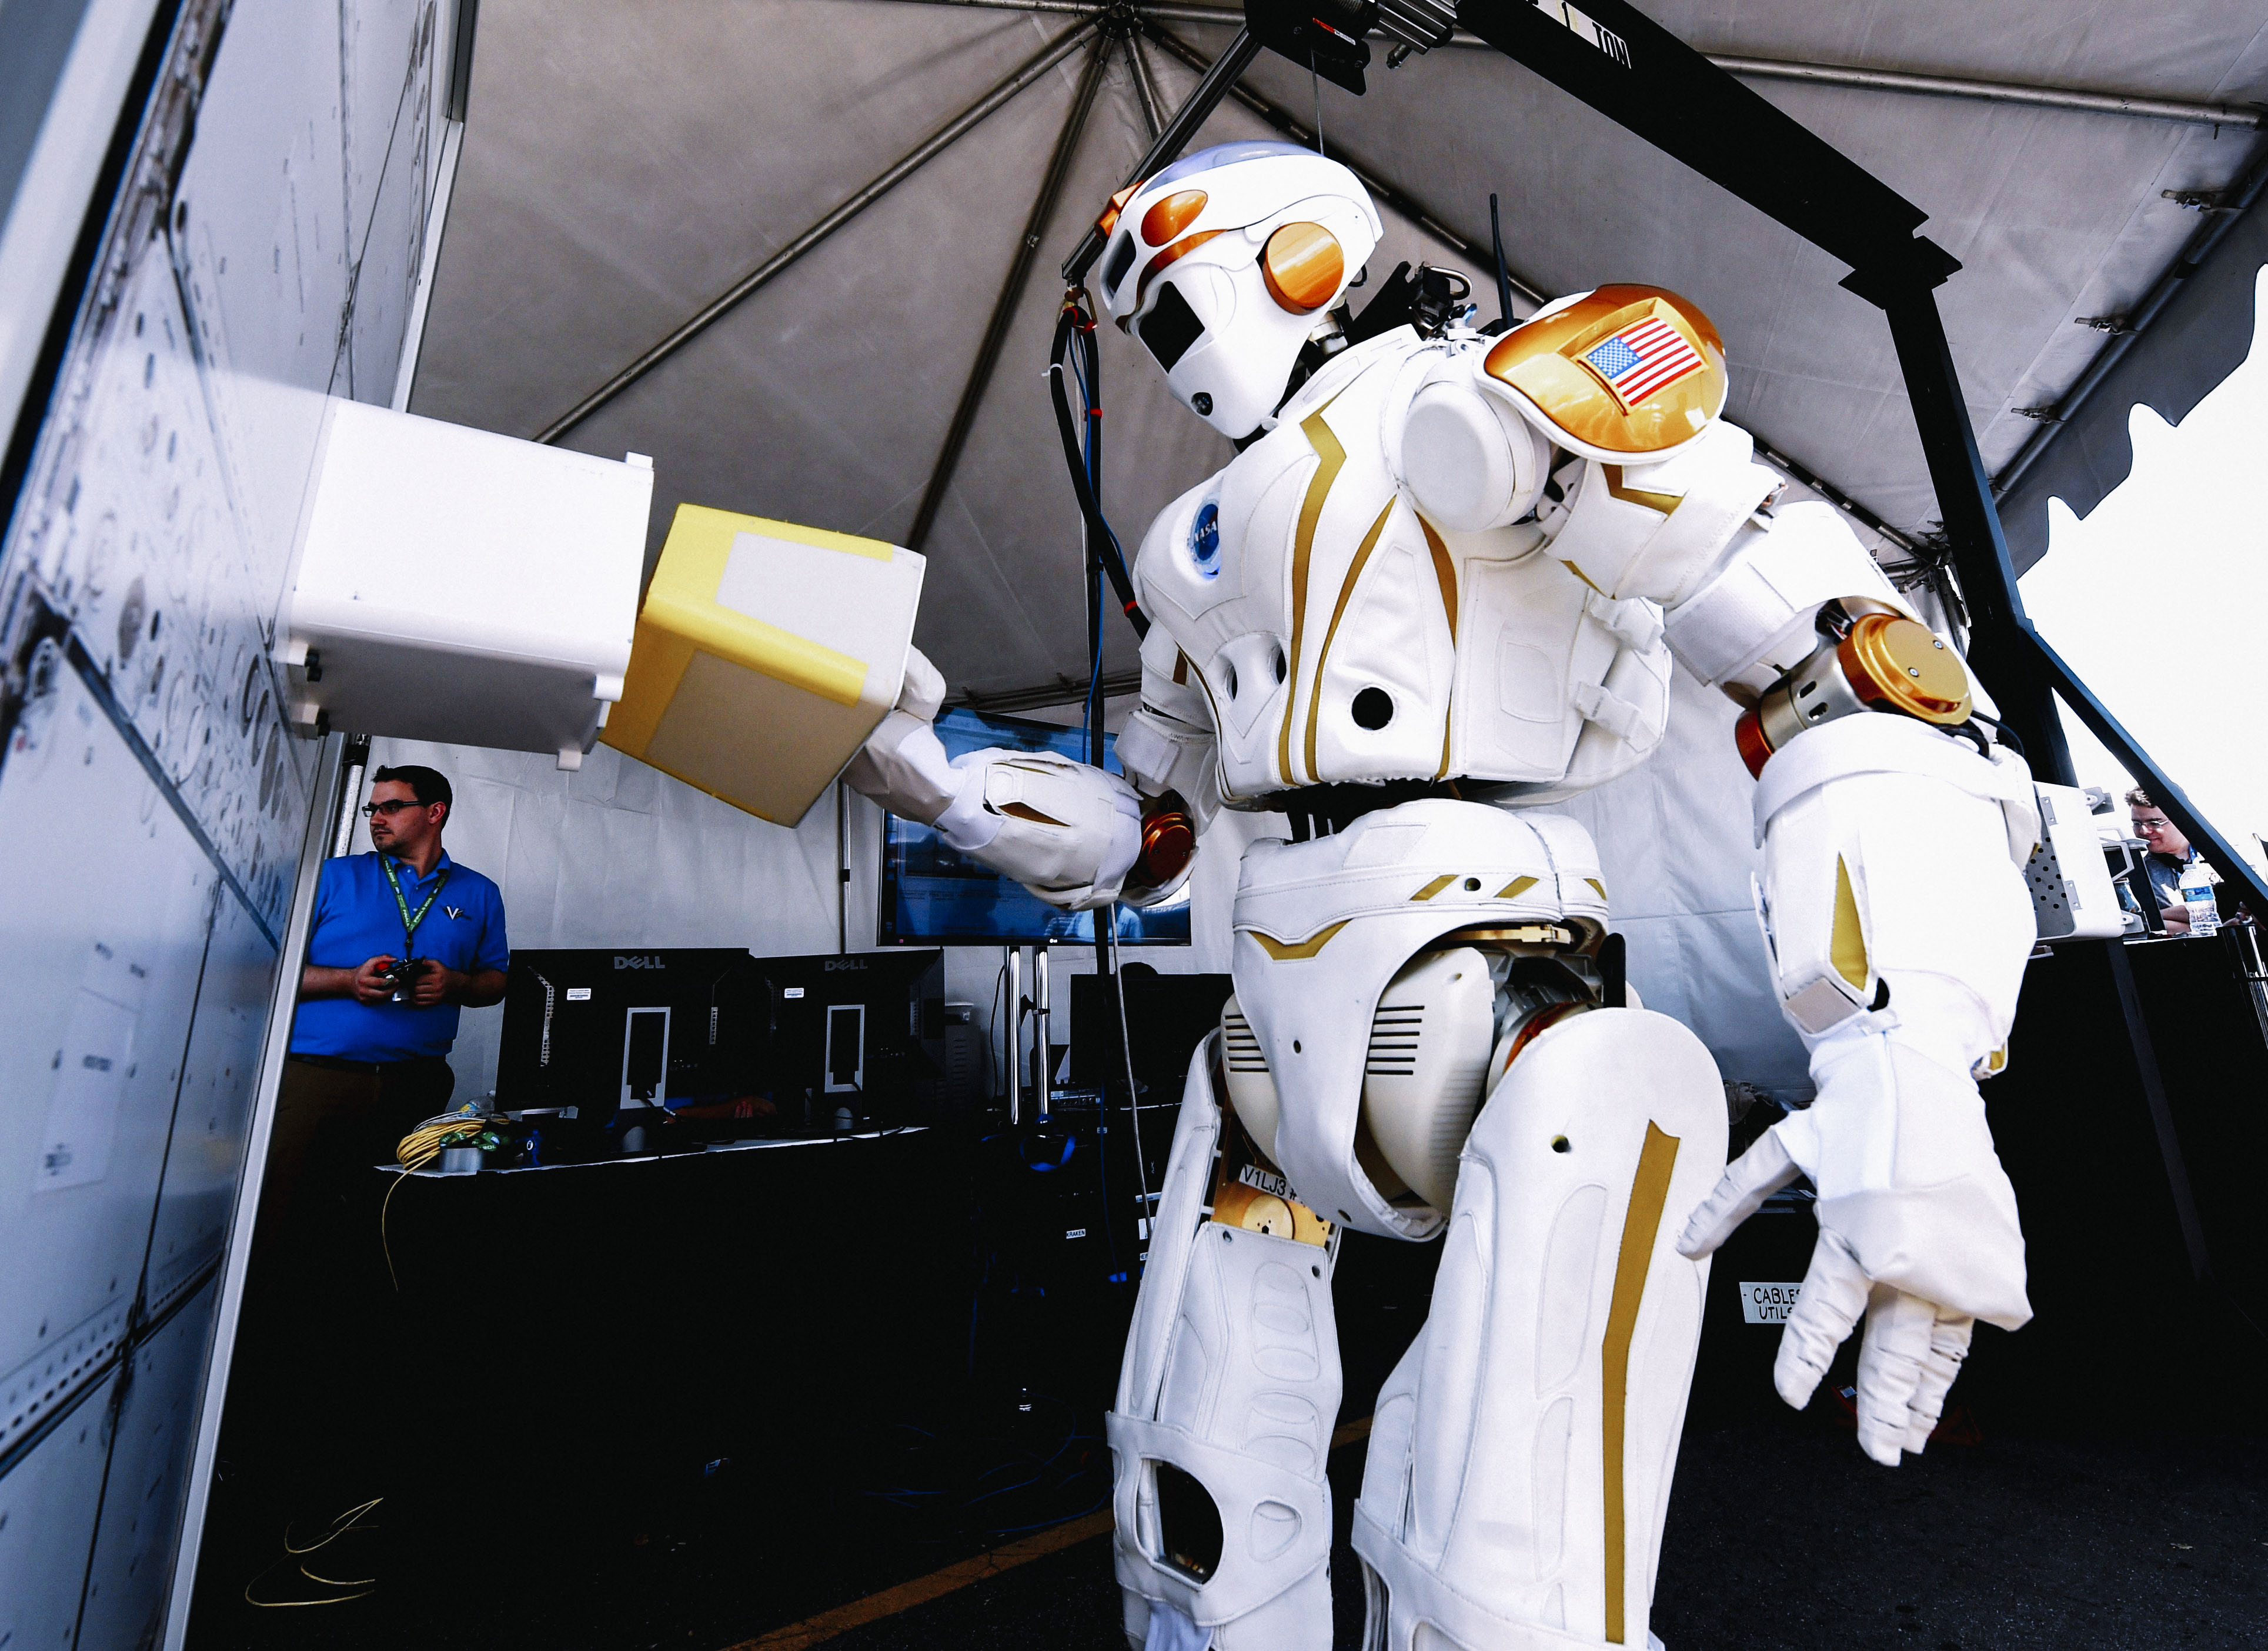 The humanoid robot named 'Valkyrie' designed by NASA is on display during the finals of the DARPA Robotics Challenge at the Fairplex complex in Pomona, California on June 5, 2015. The competition has 24 teams vying to develop robots capable of assisting humans in responding to natural and man-made disasters. AFP PHOTO/MARK RALSTON (Photo credit should read MARK RALSTON/AFP/Getty Images)